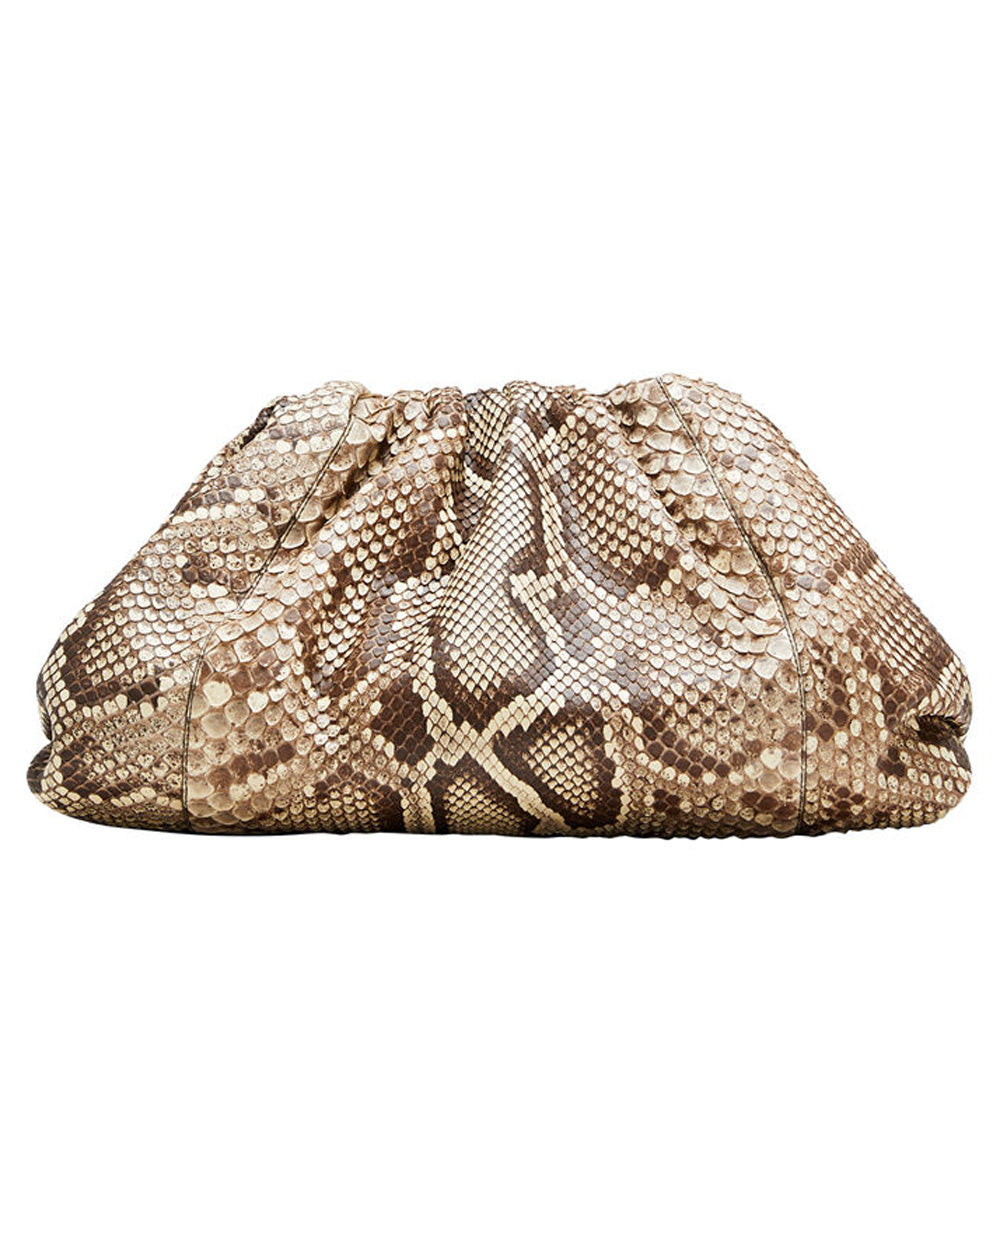 The Pouch Clutch Bag in Python